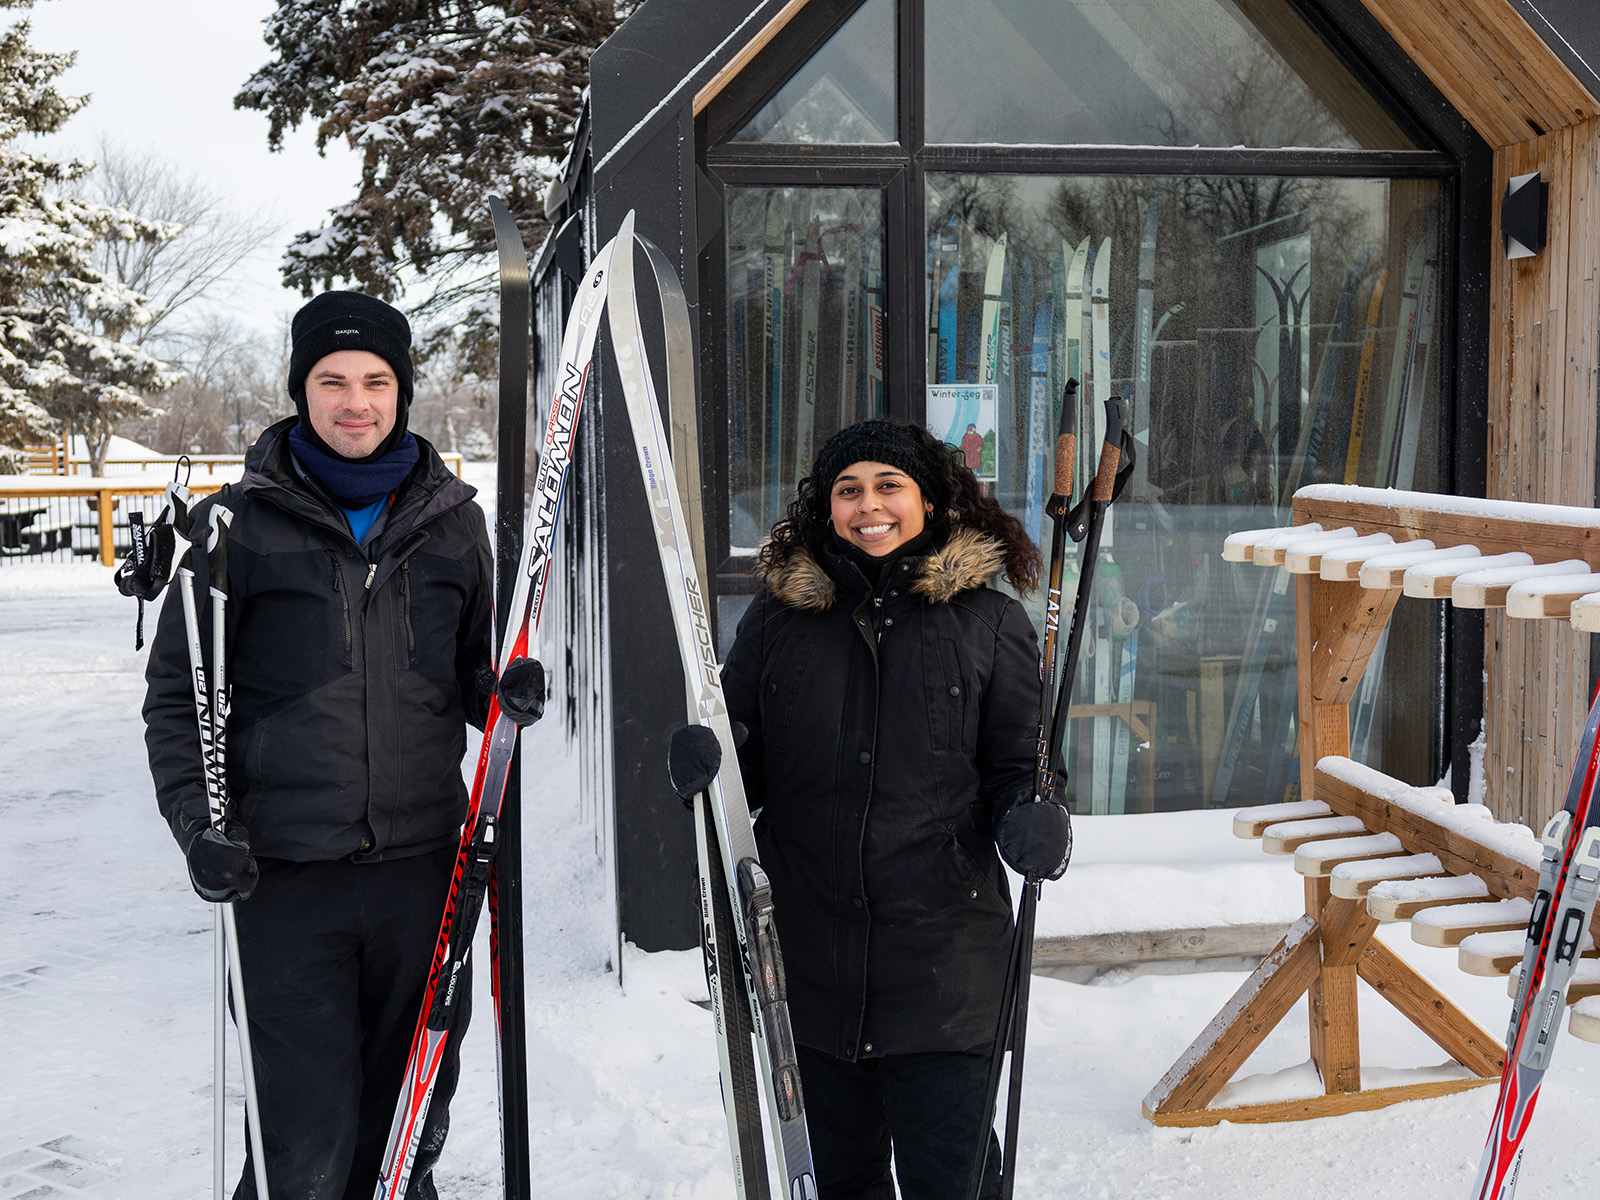 a man and a women smile at the camera holding cross country skis in front of a small rental shack